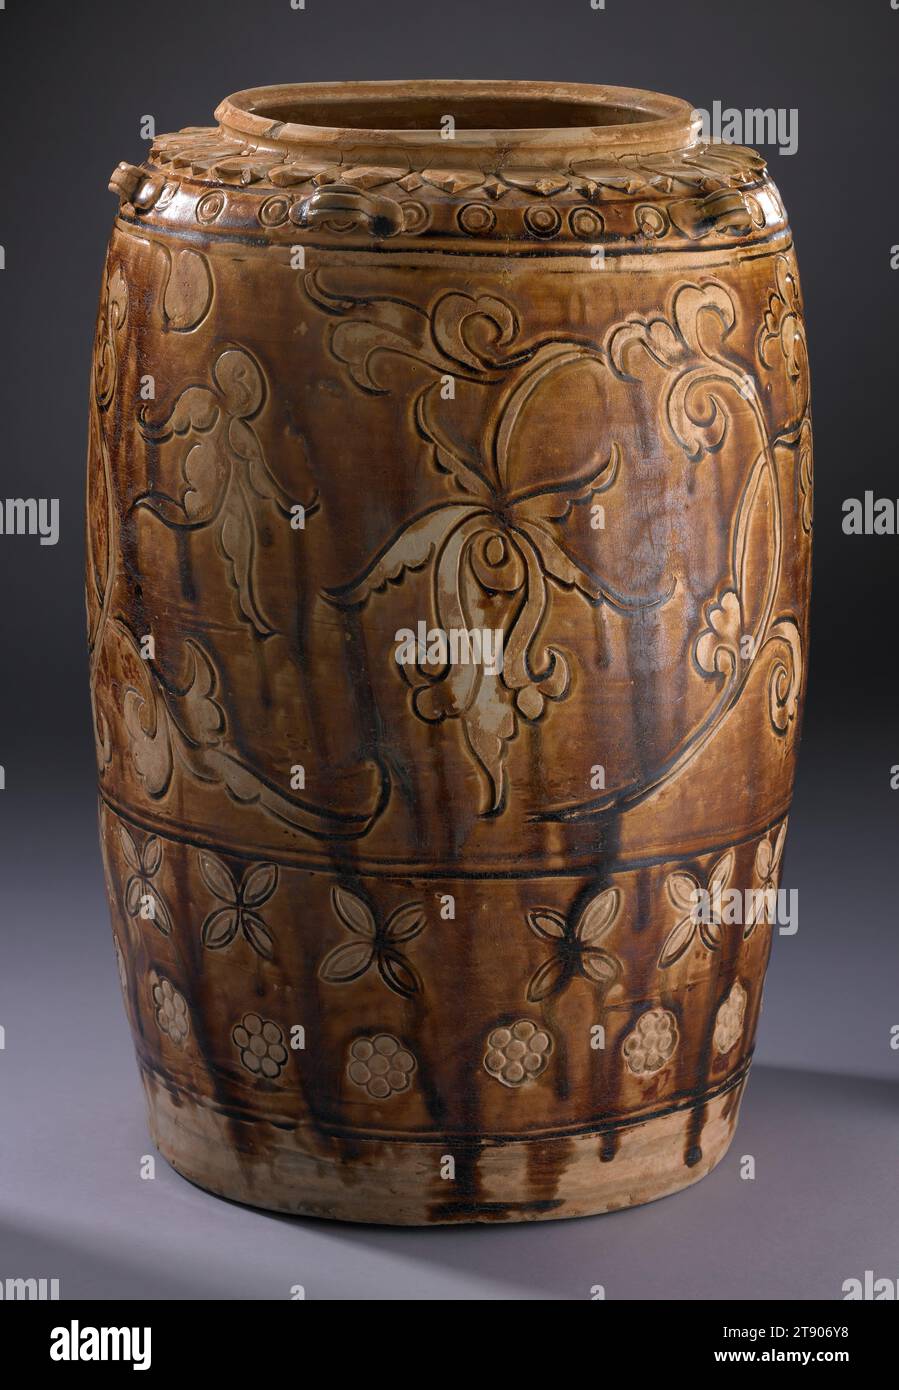 Storage Jar, Ly dynasty, 11th-13th century, 14 1/2 x 10 3/16 x 10 3/16 in. (36.83 x 25.88 x 25.88 cm), Stoneware, Vietnam, Ly dynasty, 11th-13th century, After more than 1,000 years of varying degrees of Chinese occupation, the people of northern Vietnam gained their independence and established a capital at present-day Hanoi. This period of freedom saw a flourishing of Vietnamese culture. The selective adoption of neighboring Chinese developments in ceramics created distinctly Vietnamese forms. The spontaneity of line, color, and pattern are hallmarks of Vietnamese ceramics Stock Photo